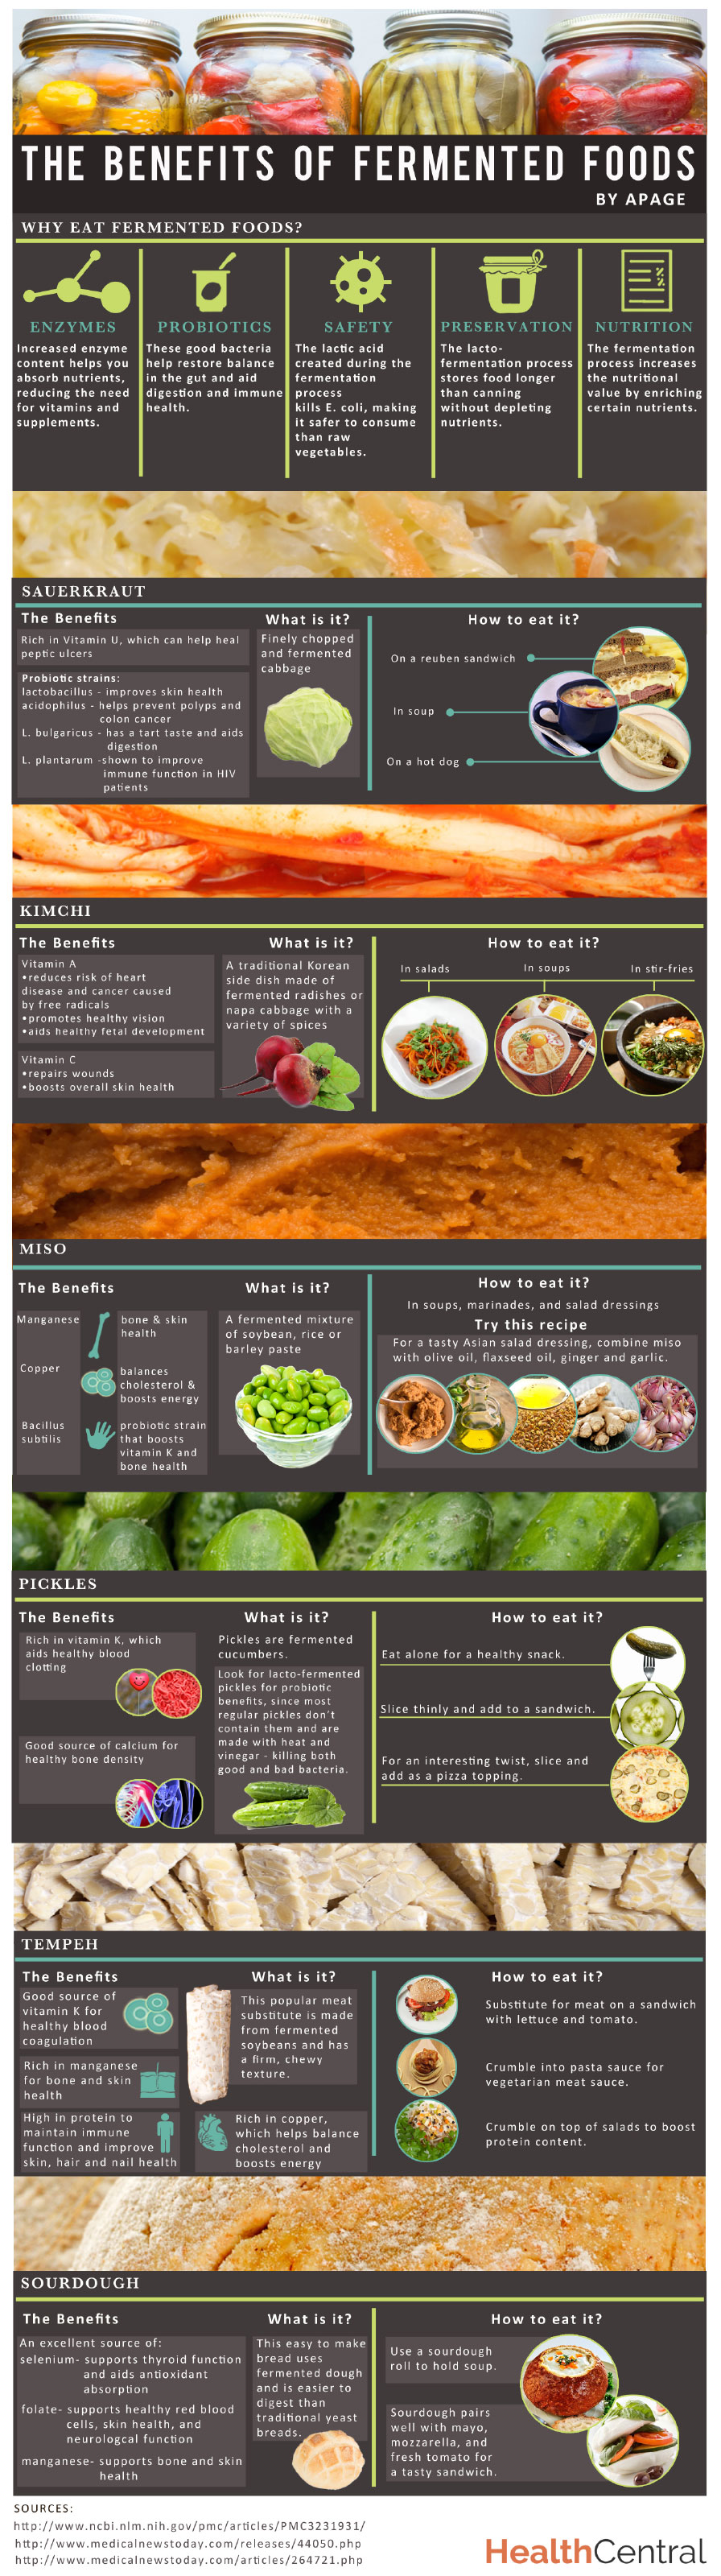 Fermented Foods And Their Benefits For Your Health Infographic